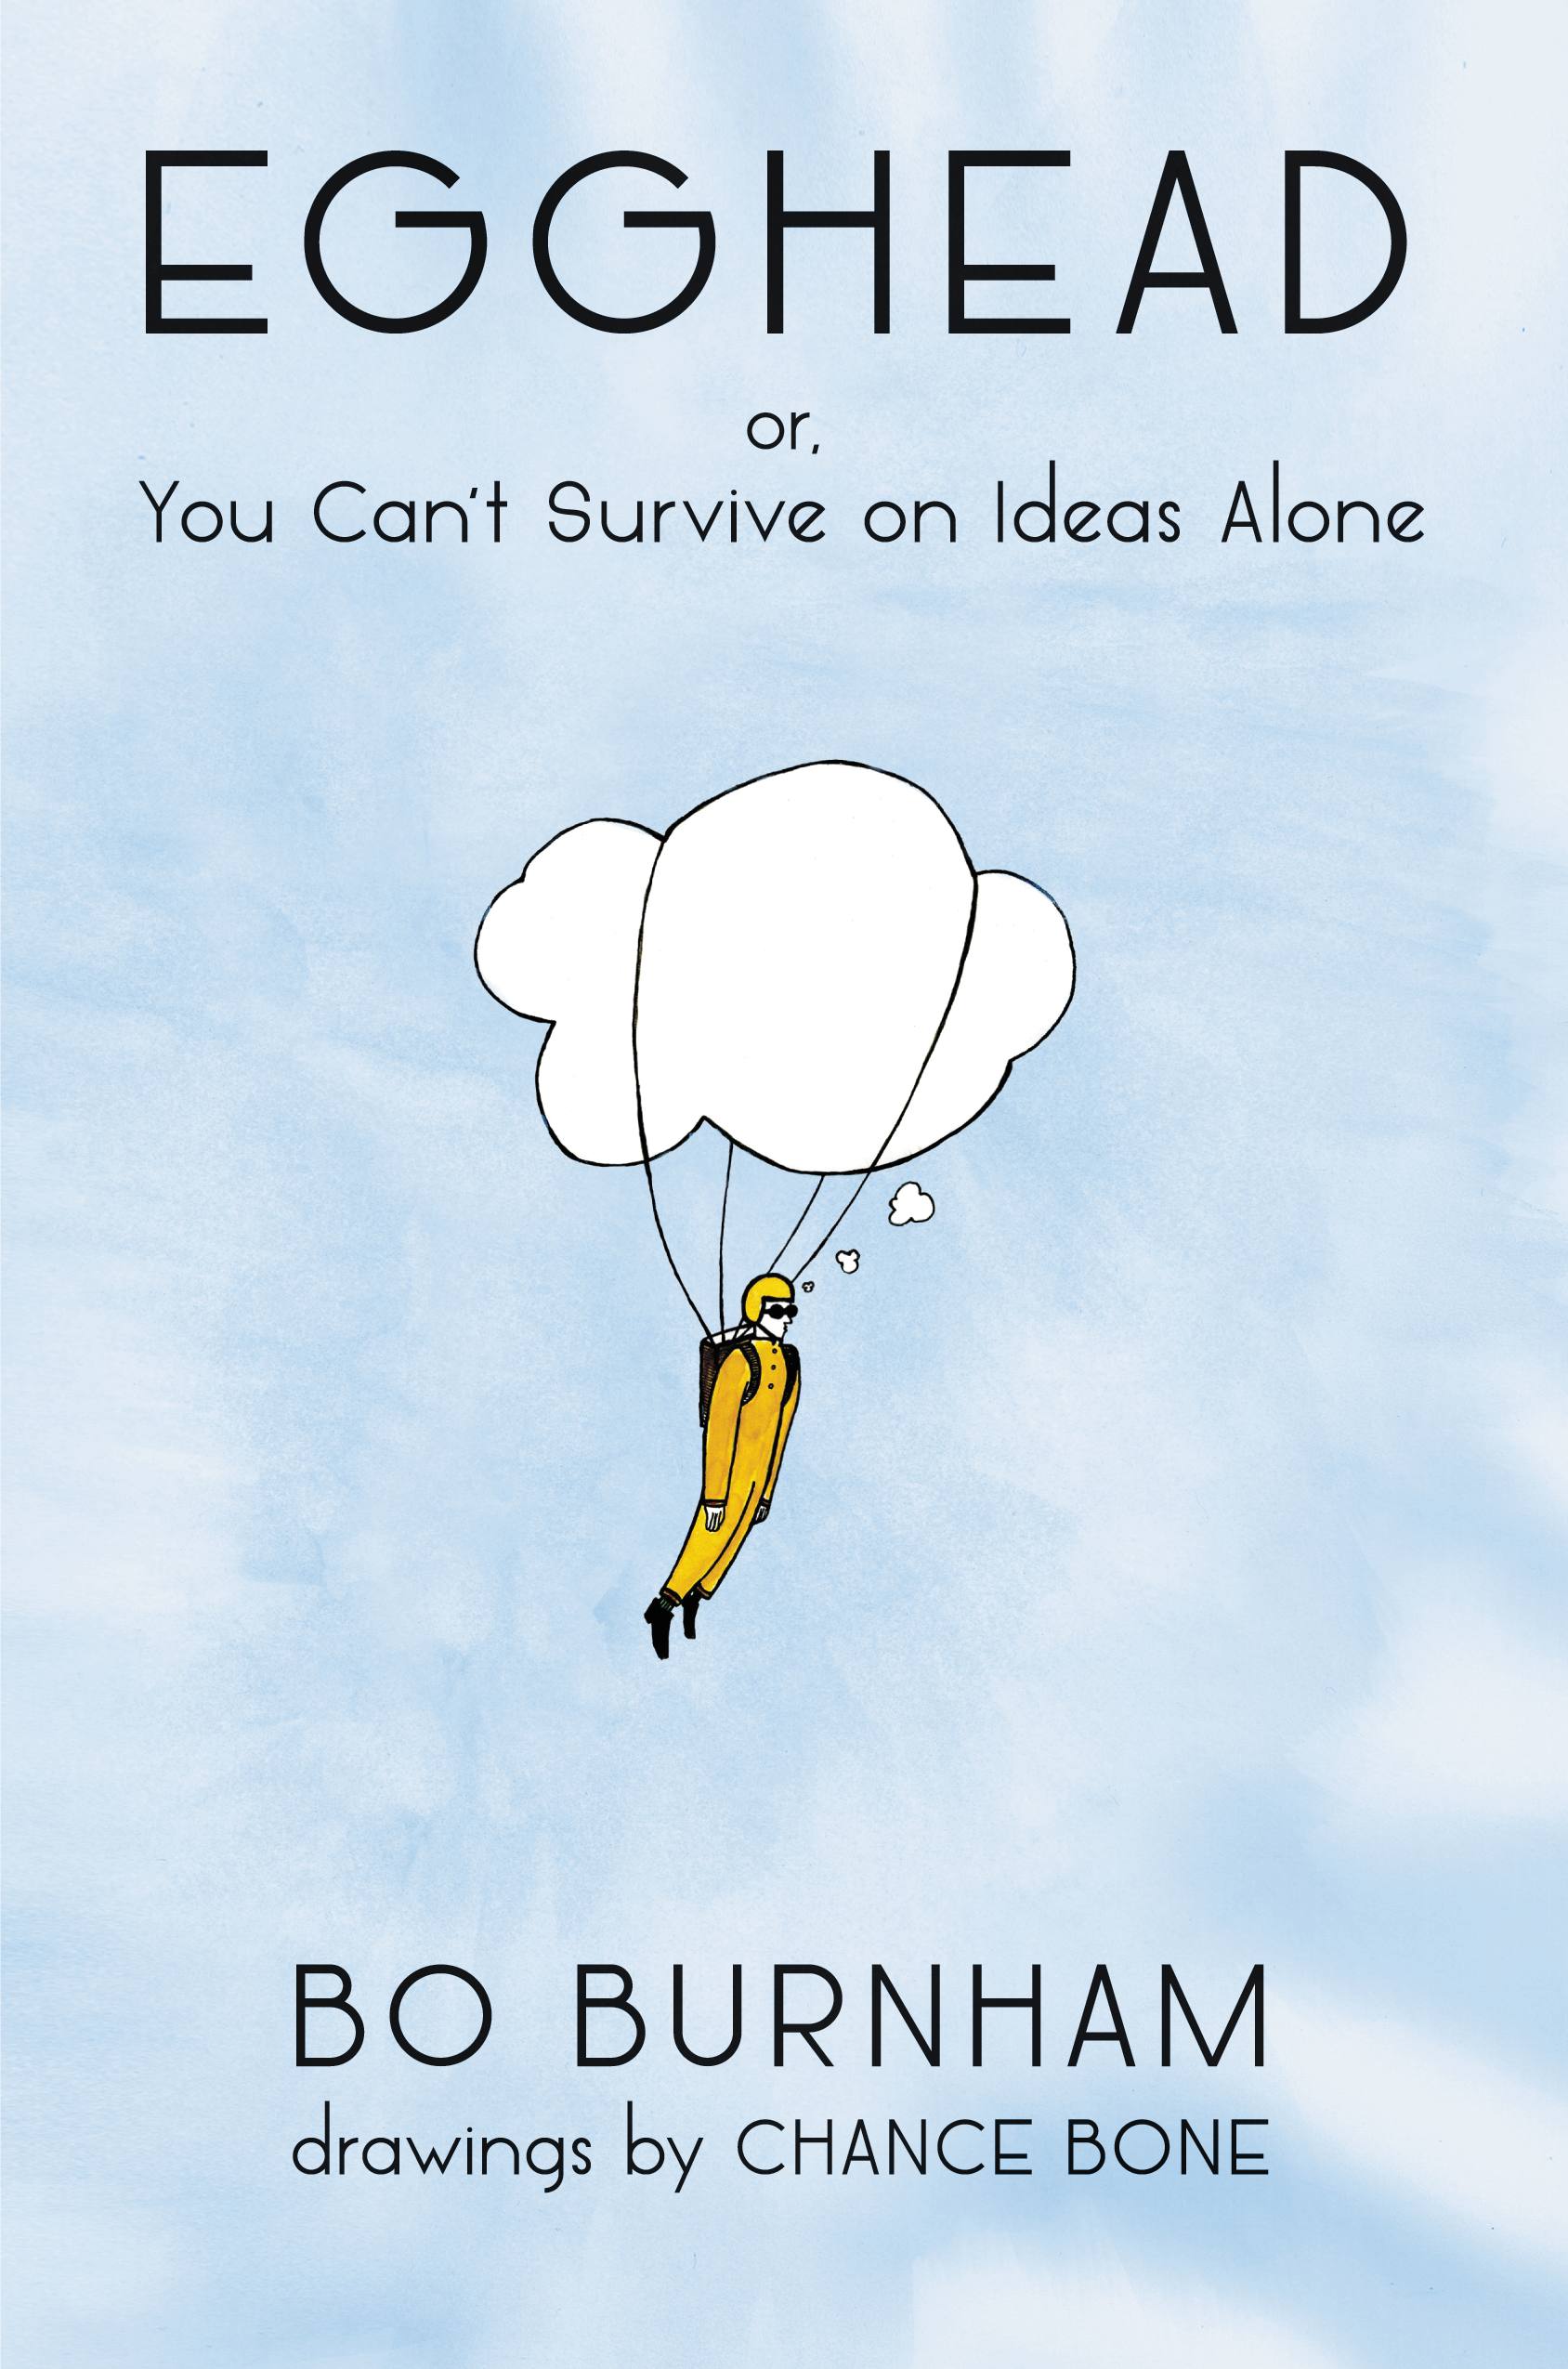 Book Launch: Egghead: Or, You Can't Survive on Ideas Alone by Bo Burnham